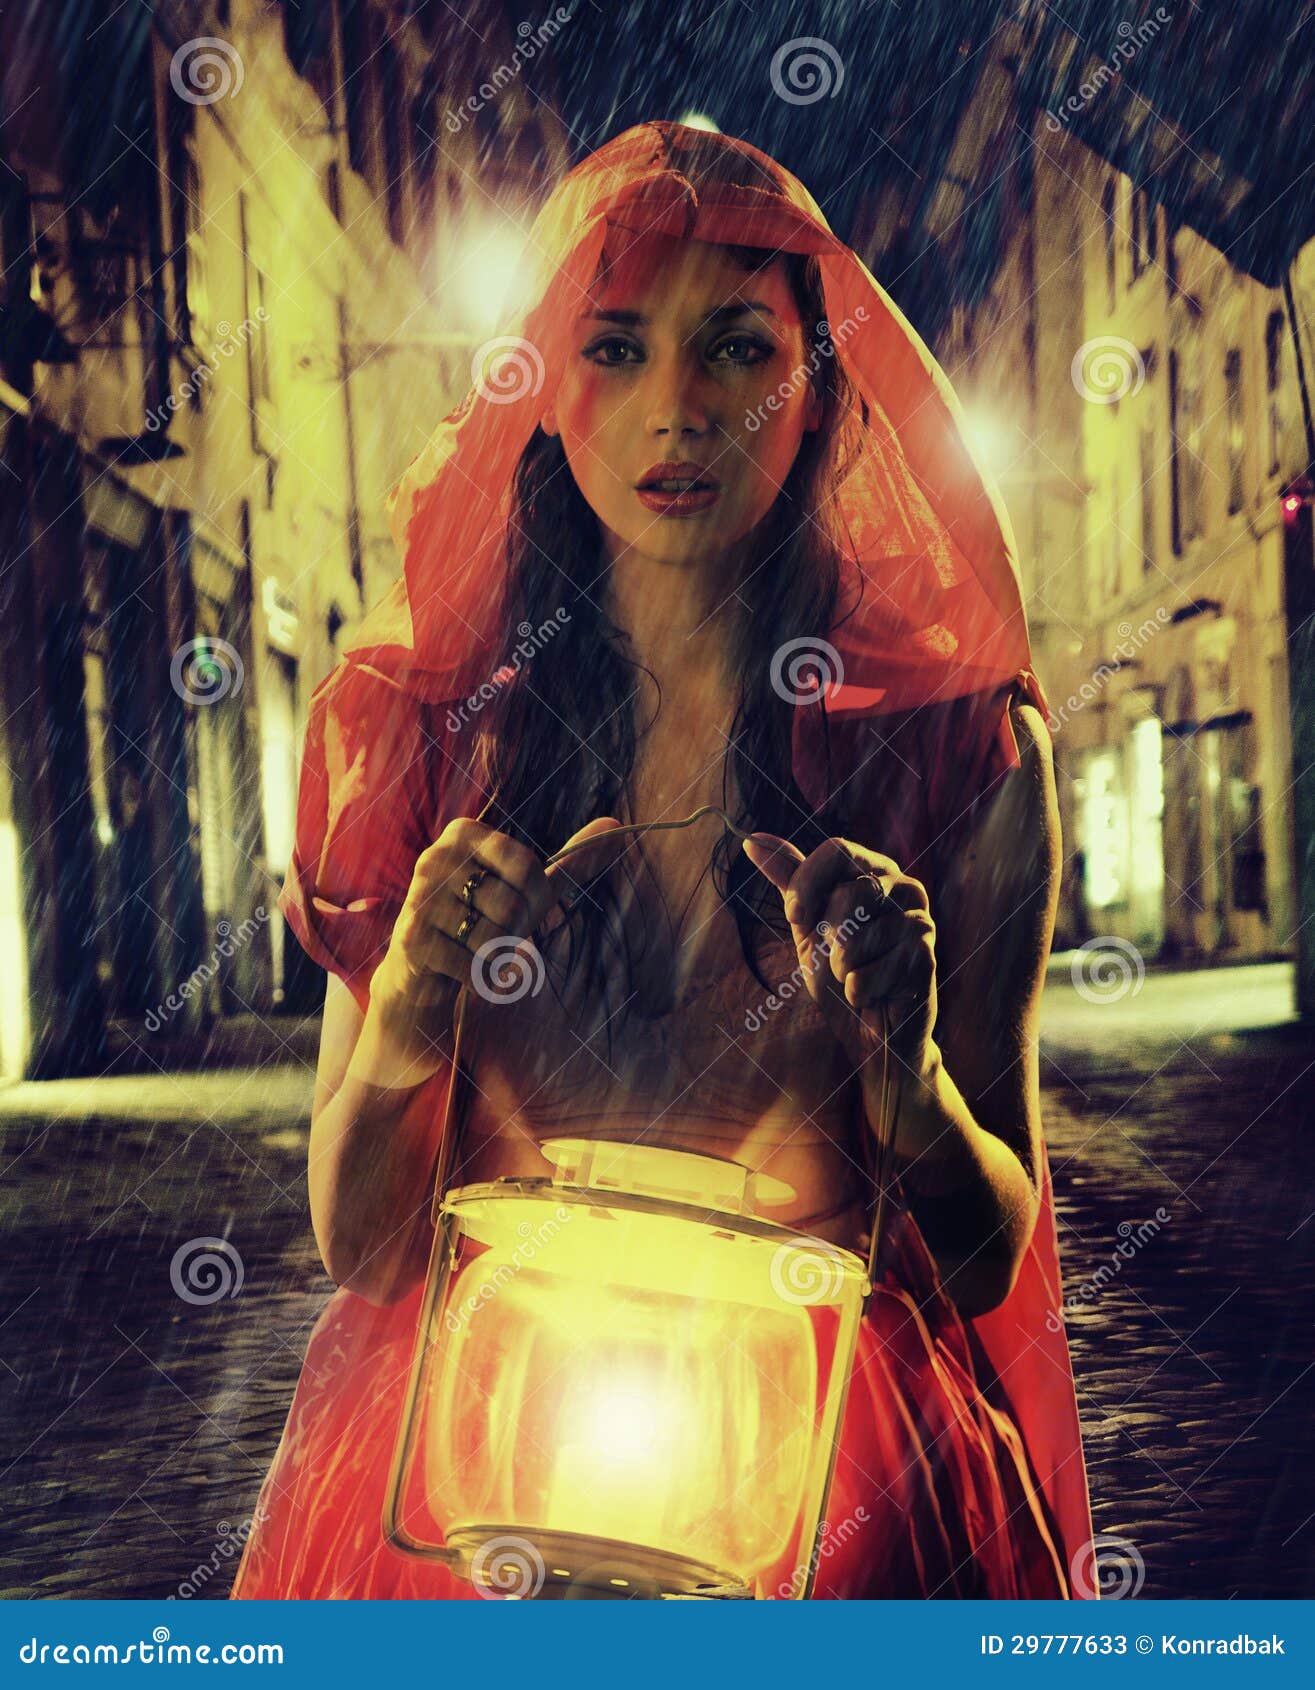 Innocent Woman In Red Holding The Lantern Stock Photos 